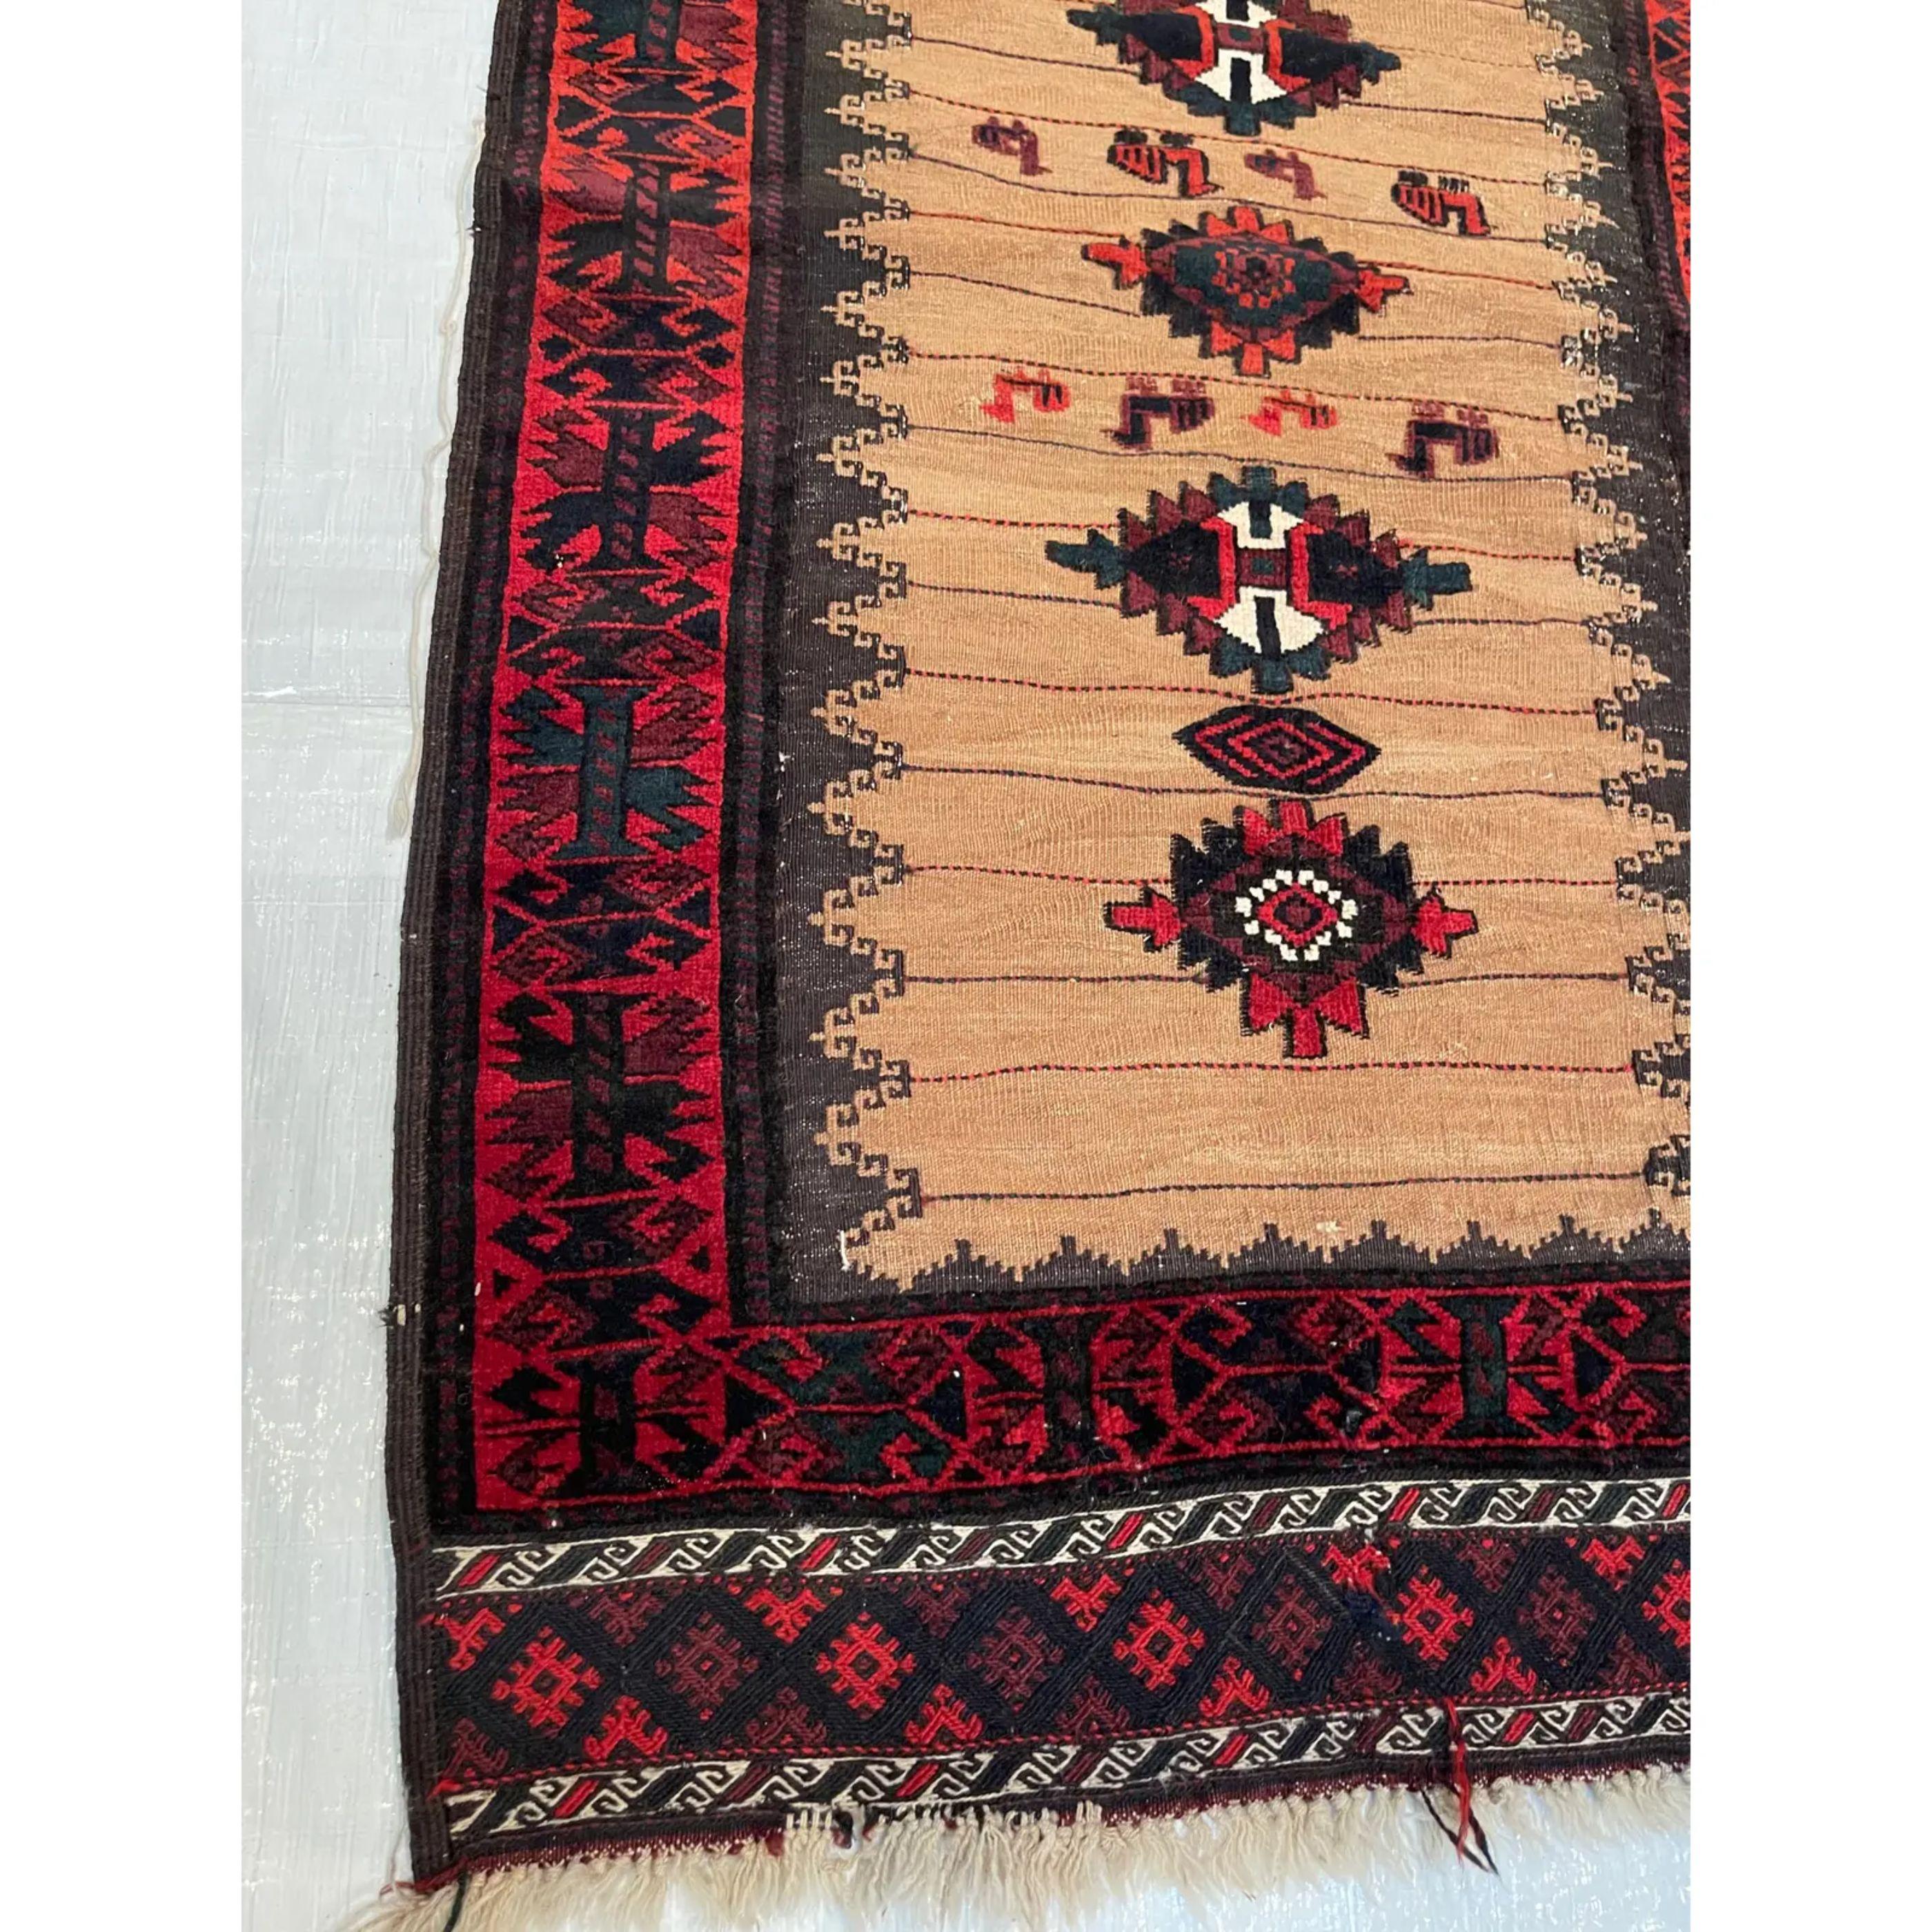 Ca.1920 Antique Baluch Sofre Rug Stylish Traditional Design